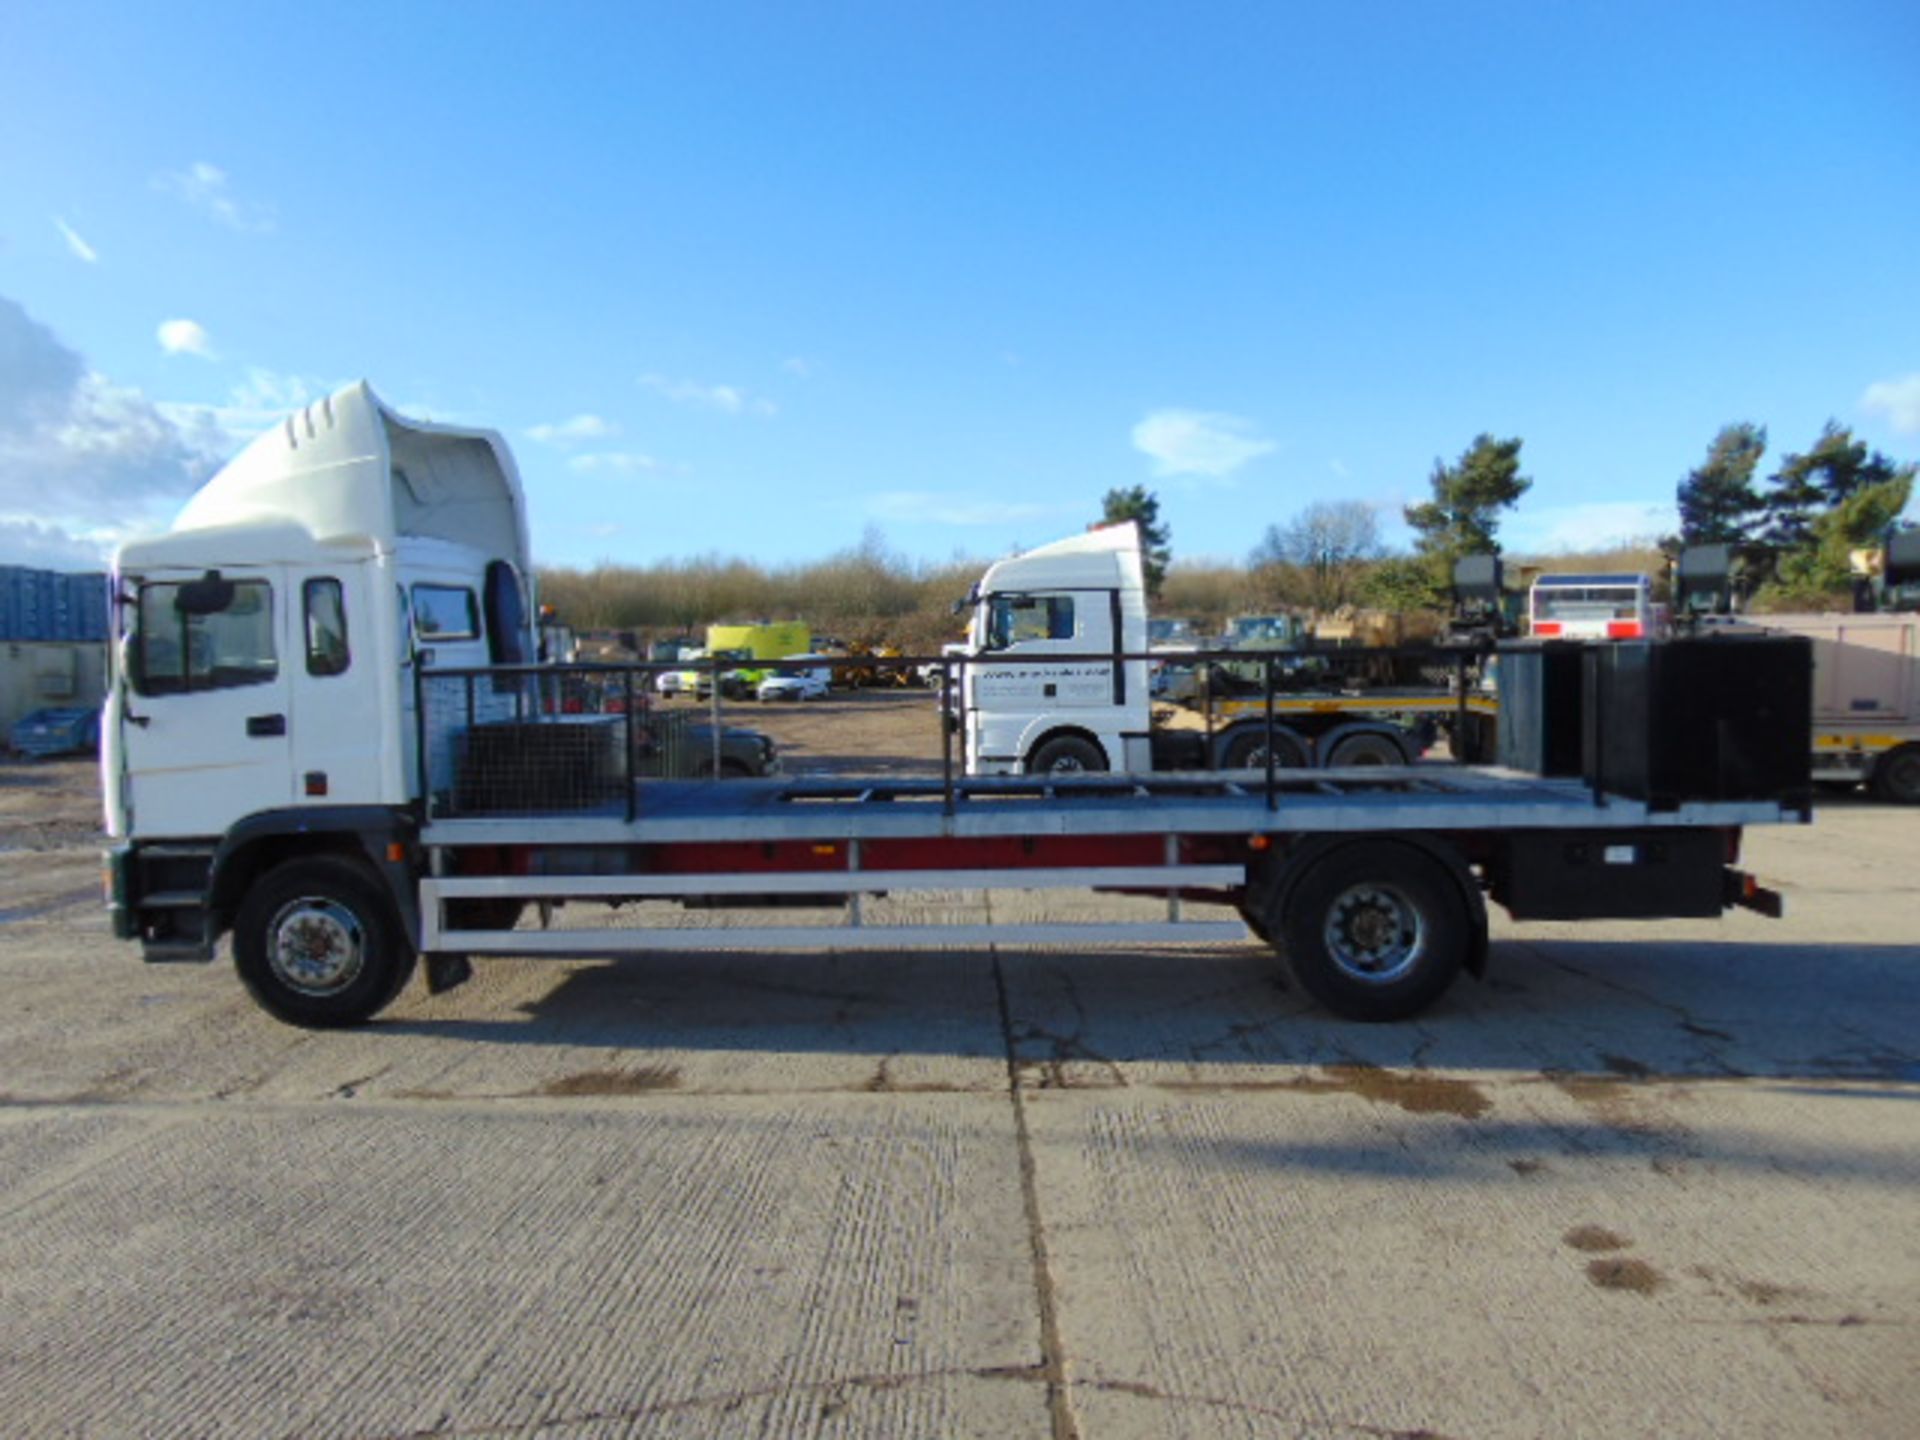 1998 ERF EC6.23 RD2 4x2 Flatbed Truck - Image 4 of 22